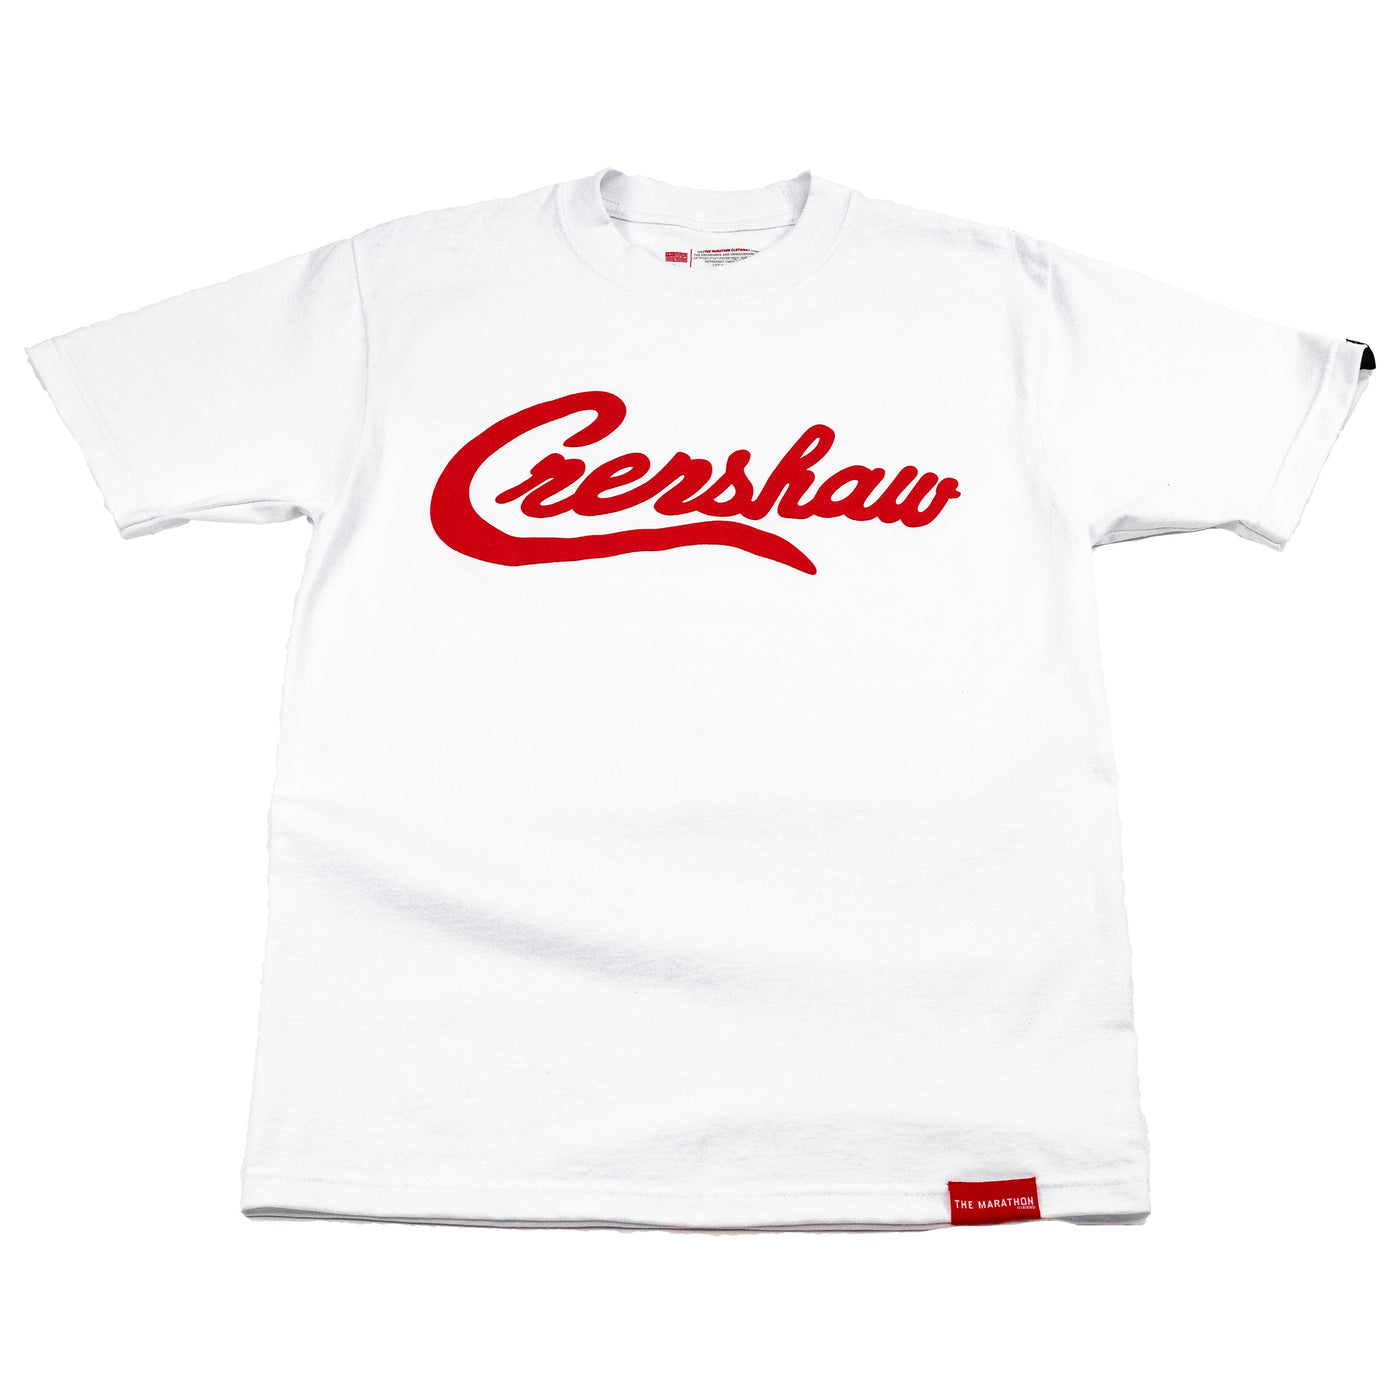 Crenshaw T-Shirt - White/Red - Front